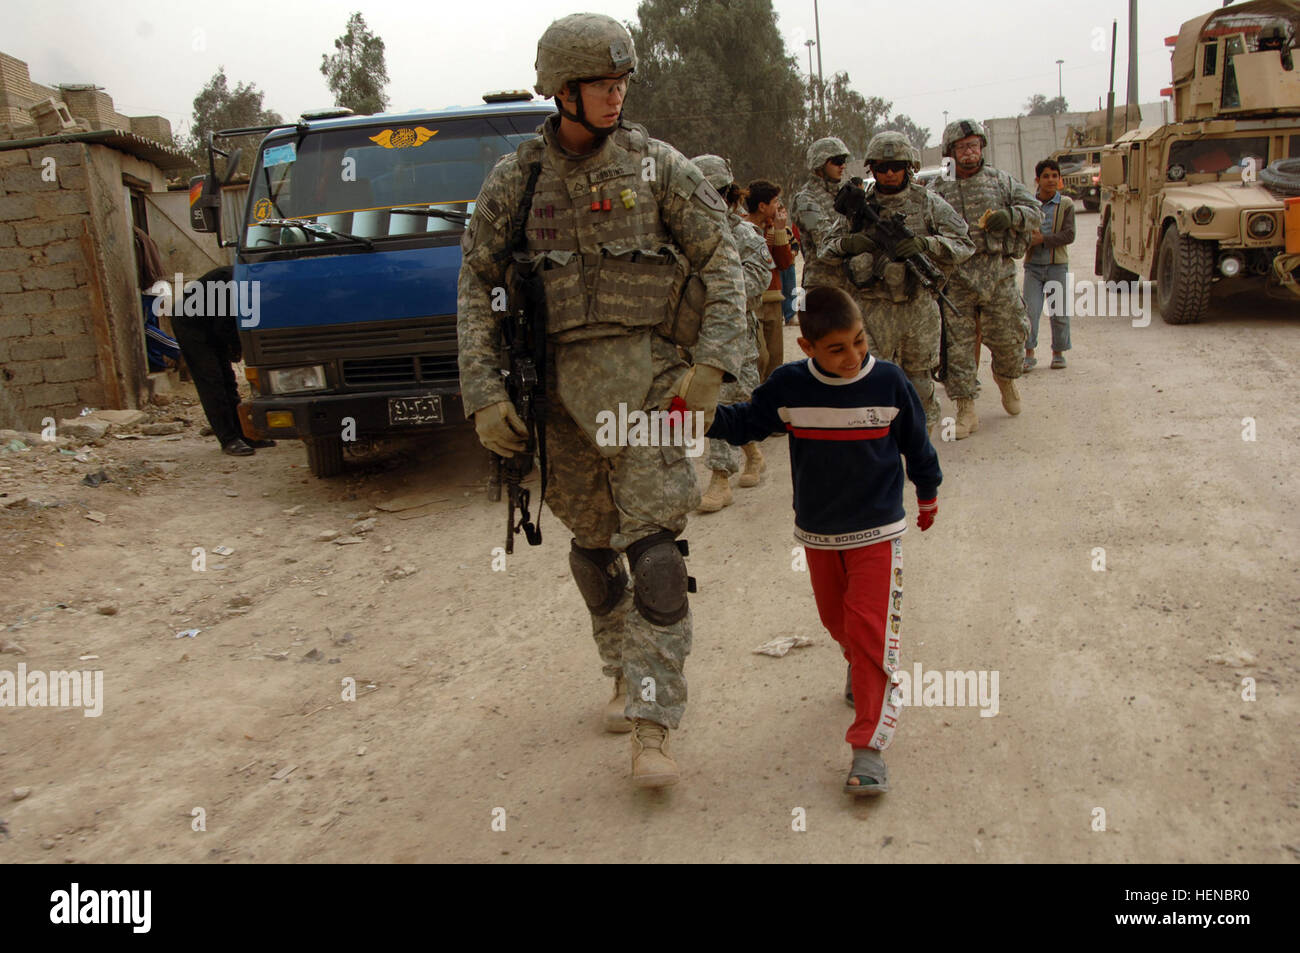 Pfc. Steven Robbins from Battery B, 2nd Battalion, 32nd Field Artillery Regiment, attached to 2nd Brigade Combat Team, 101st Airborne Division (Air Assault),  holds hands with an Iraqi boy during a patrol in Qadasiyah, Iraq, Feb. 18.  (U.S. Army photo/Sgt. Sharhonda R. McCoy) Dismounted Patrol 78186 Stock Photo